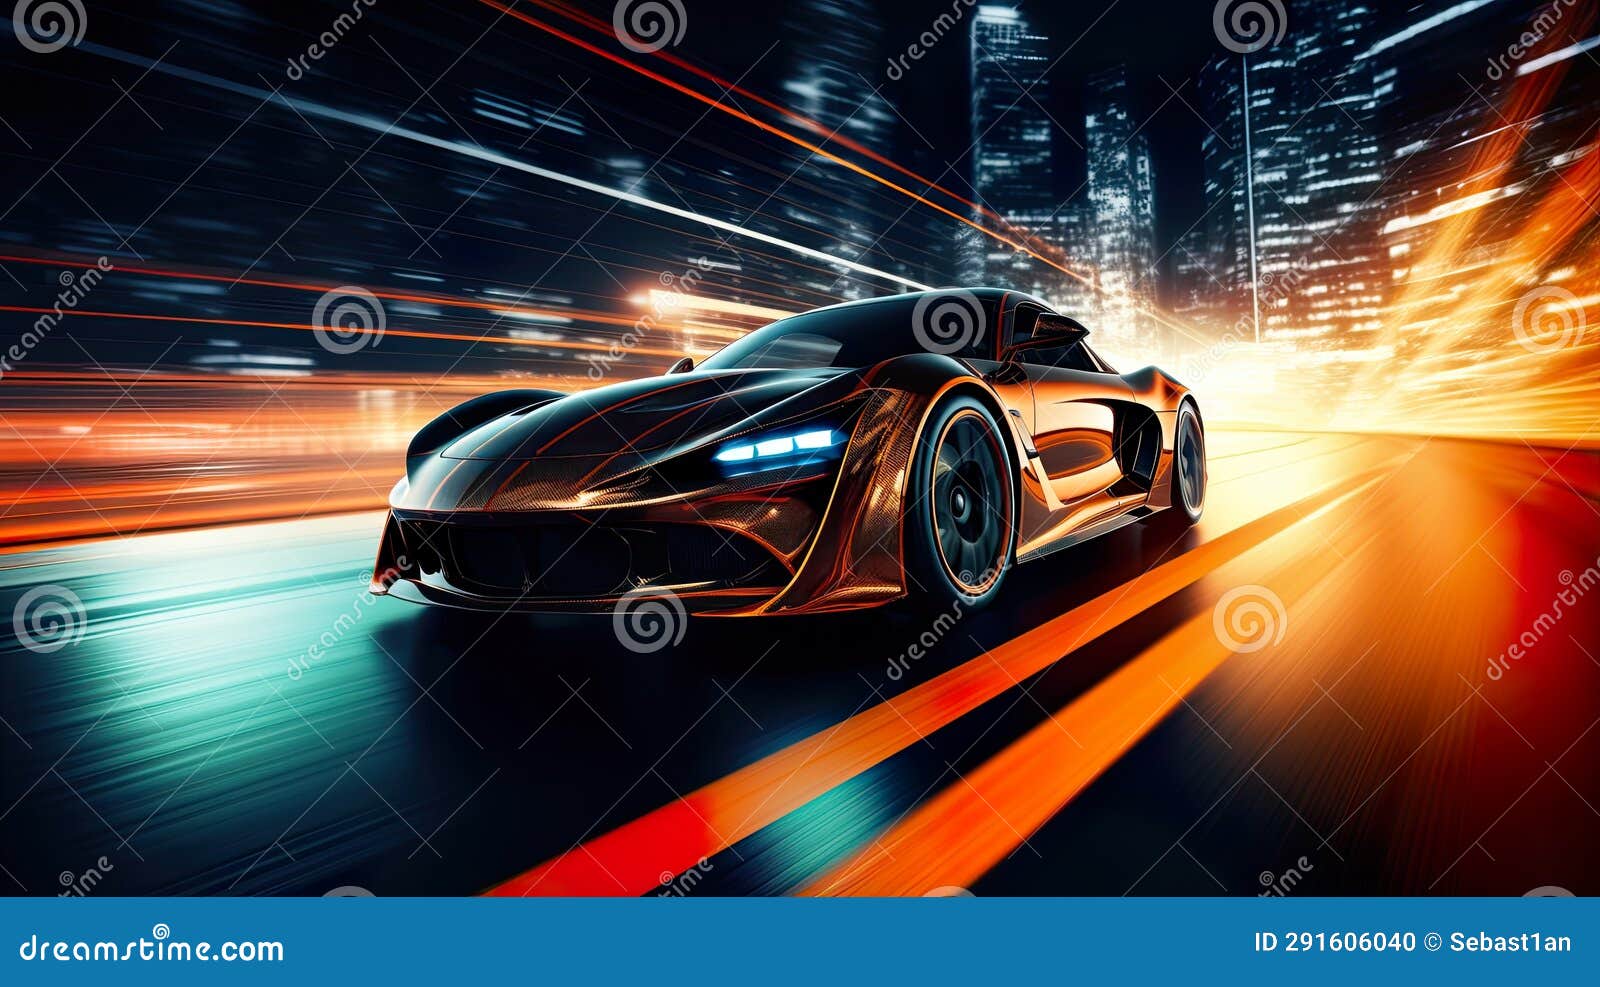 dynamic image captures a sport car in action on a road, showcasing the exhilaration of high-speed motion